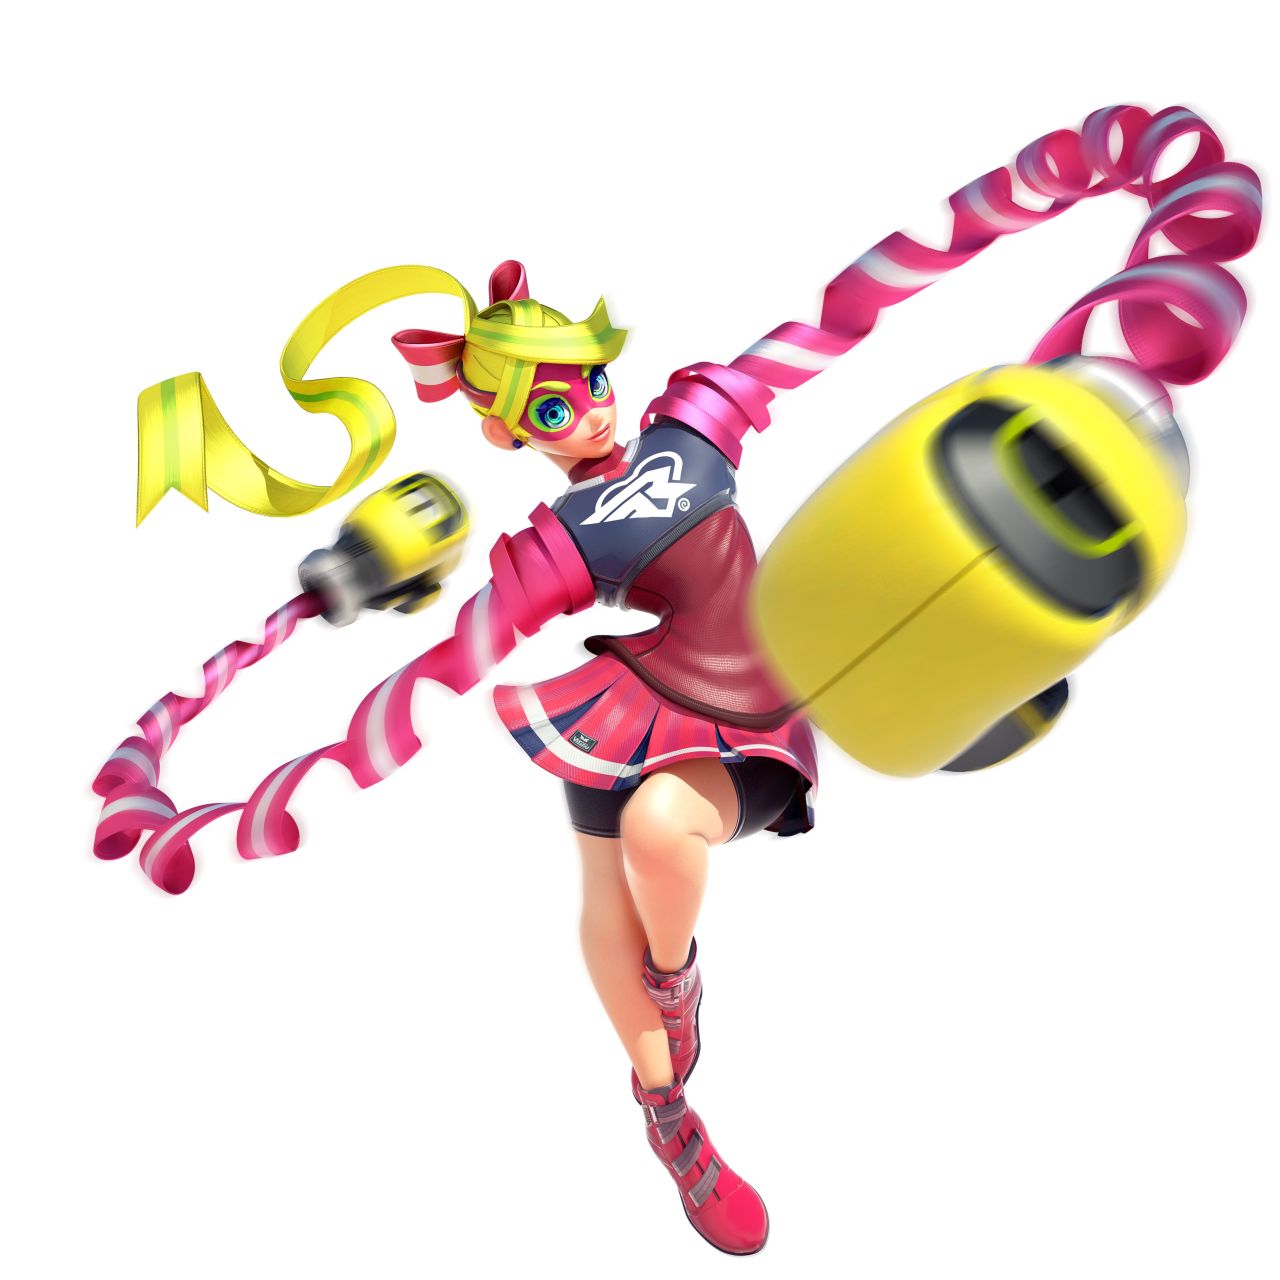 Image for Nintendo shows off Arms, a Switch game about fighting with long, stretchy arms